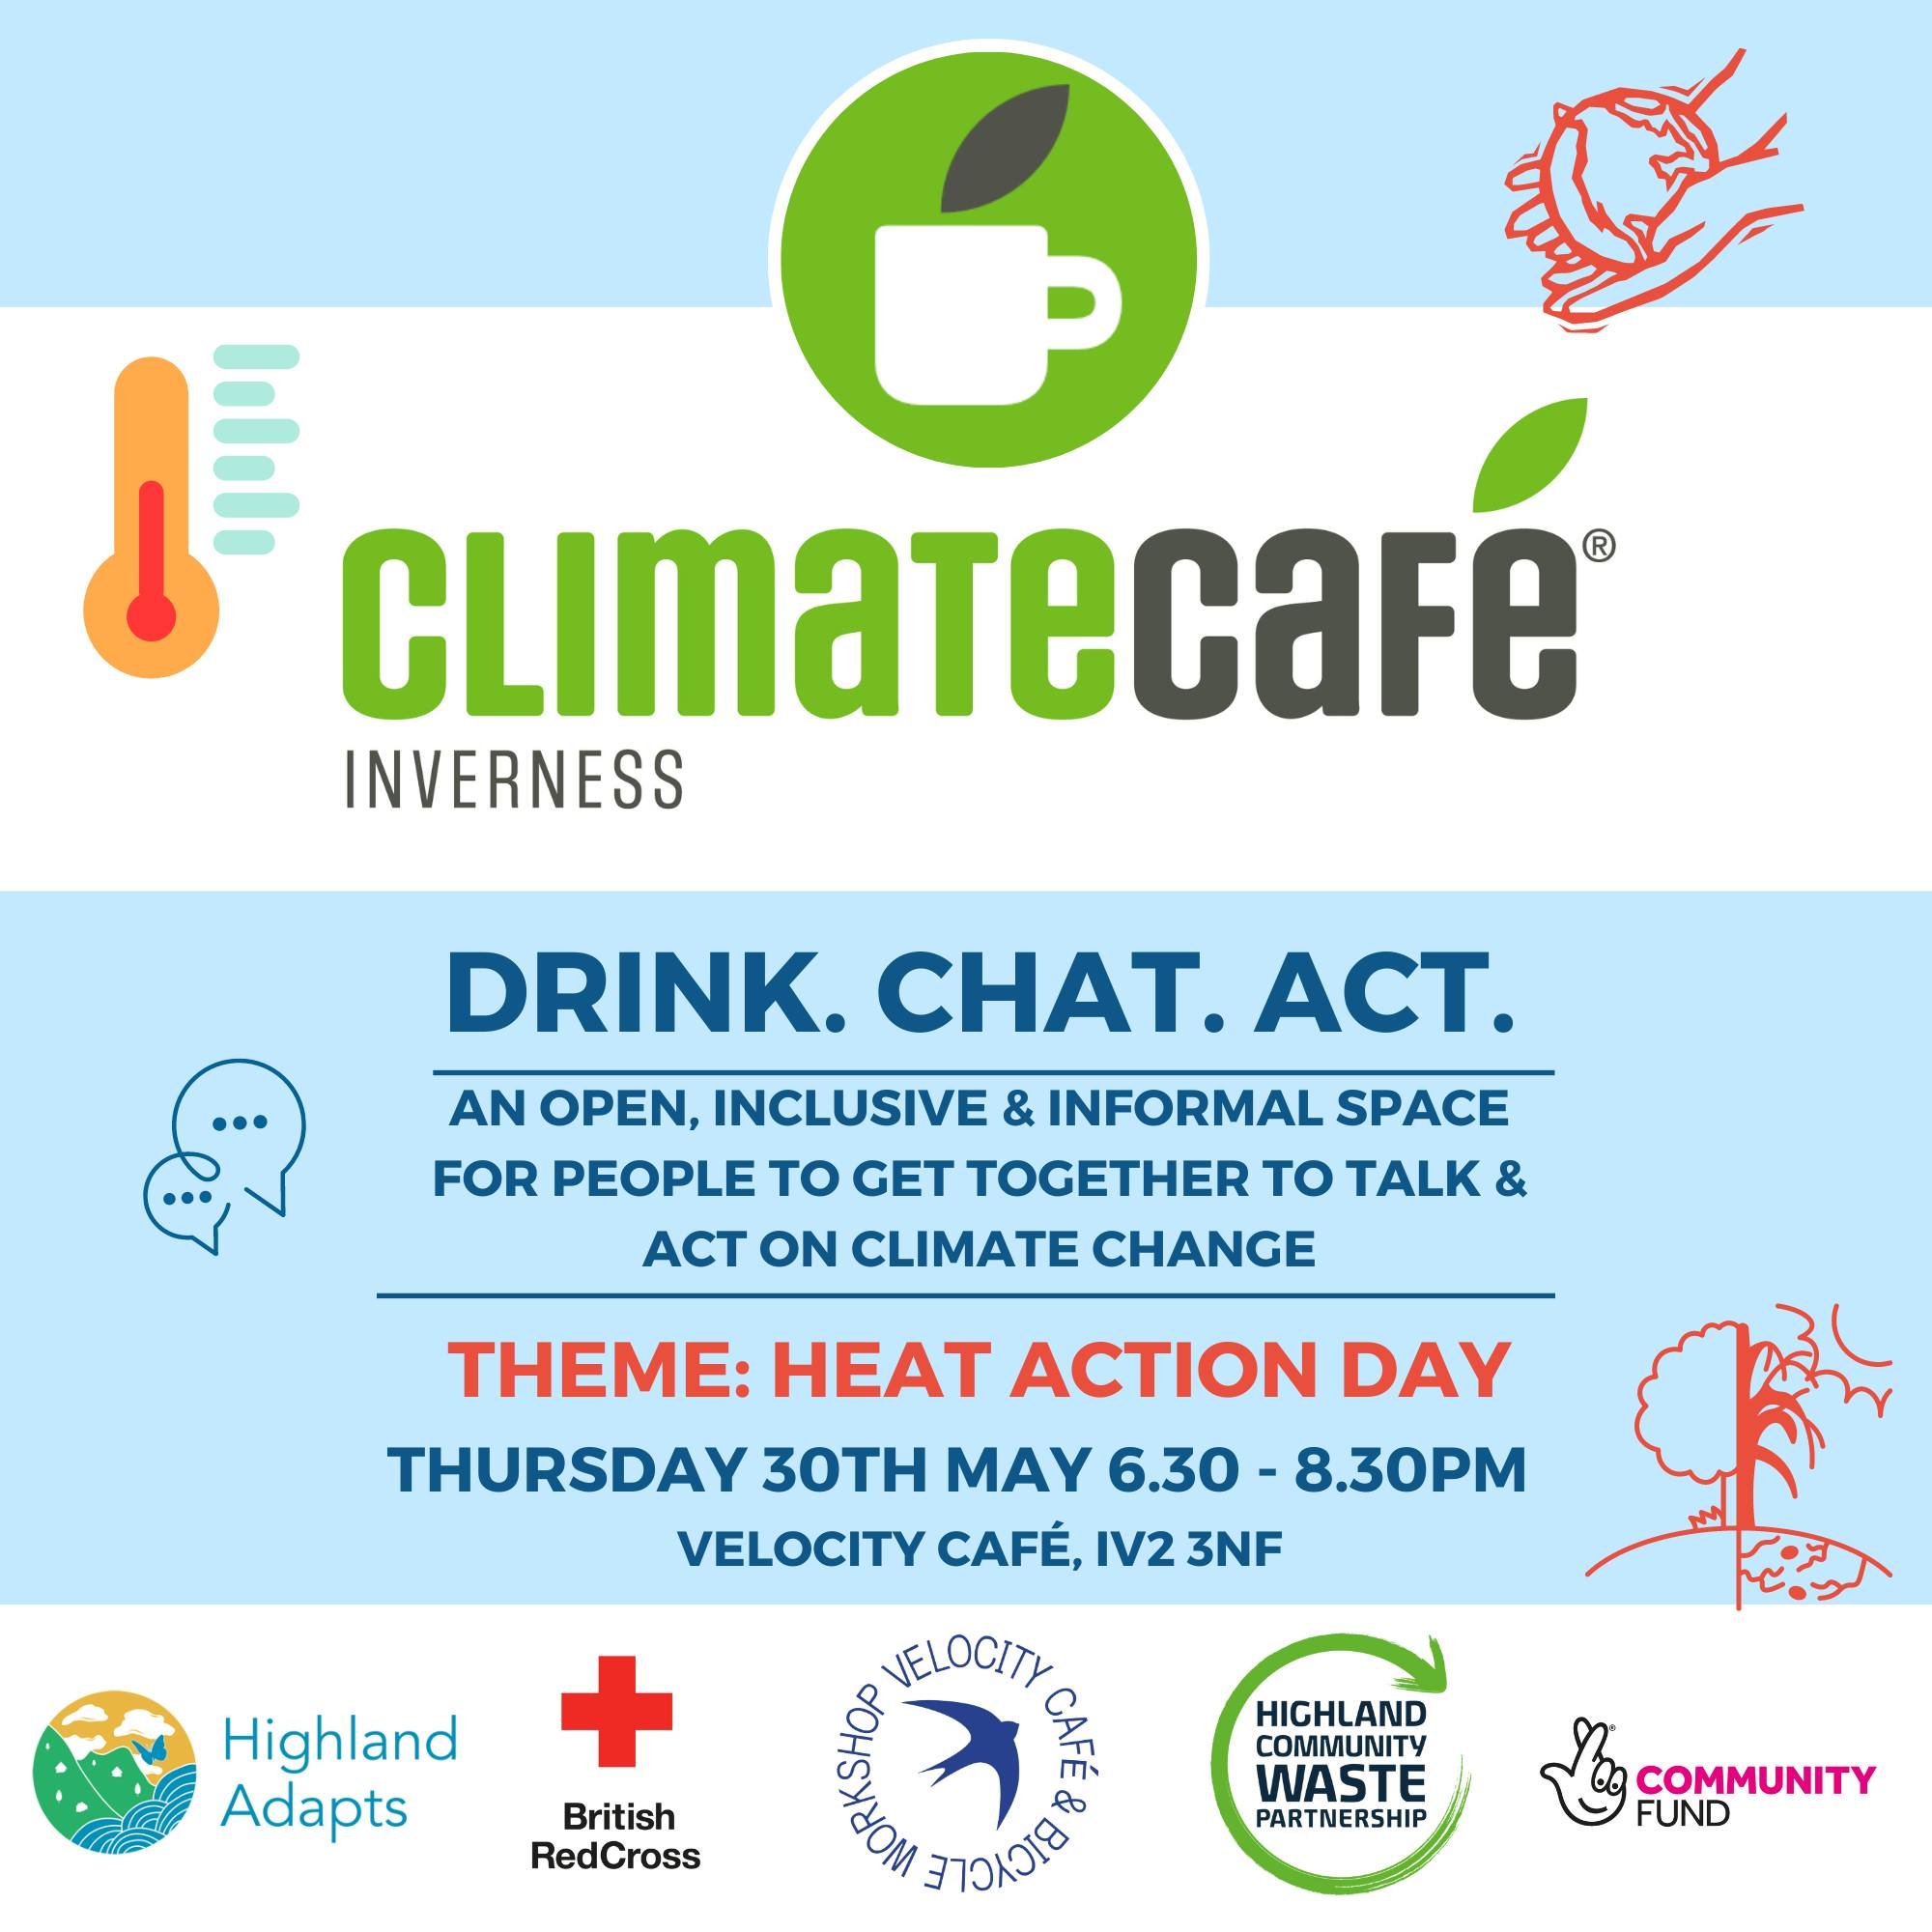 Next Climate Caf&eacute; Inverness ☕💬🌎
📅 Thursday 30th May
Theme - HEAT ACTION DAY 🌡️ 

Heat Action Day is on the 2nd of June 2024. It is a global day for raising awareness of heat risks and sharing simple ways to beat the heat. 

This Climate Ca